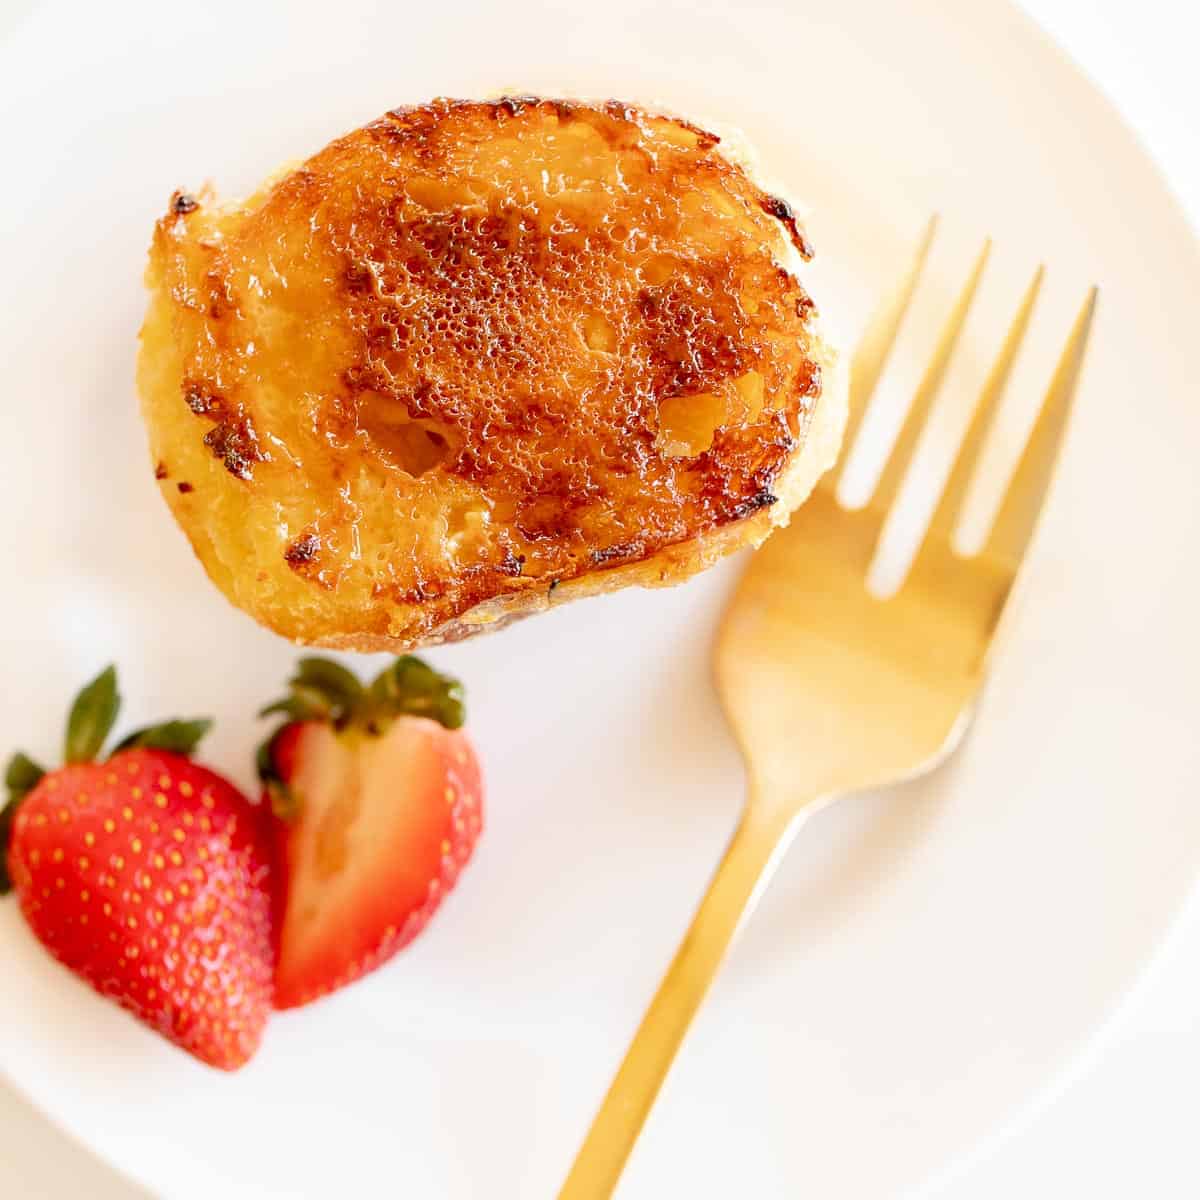 Crème Brûlée French Toast served with strawberries and gold fork